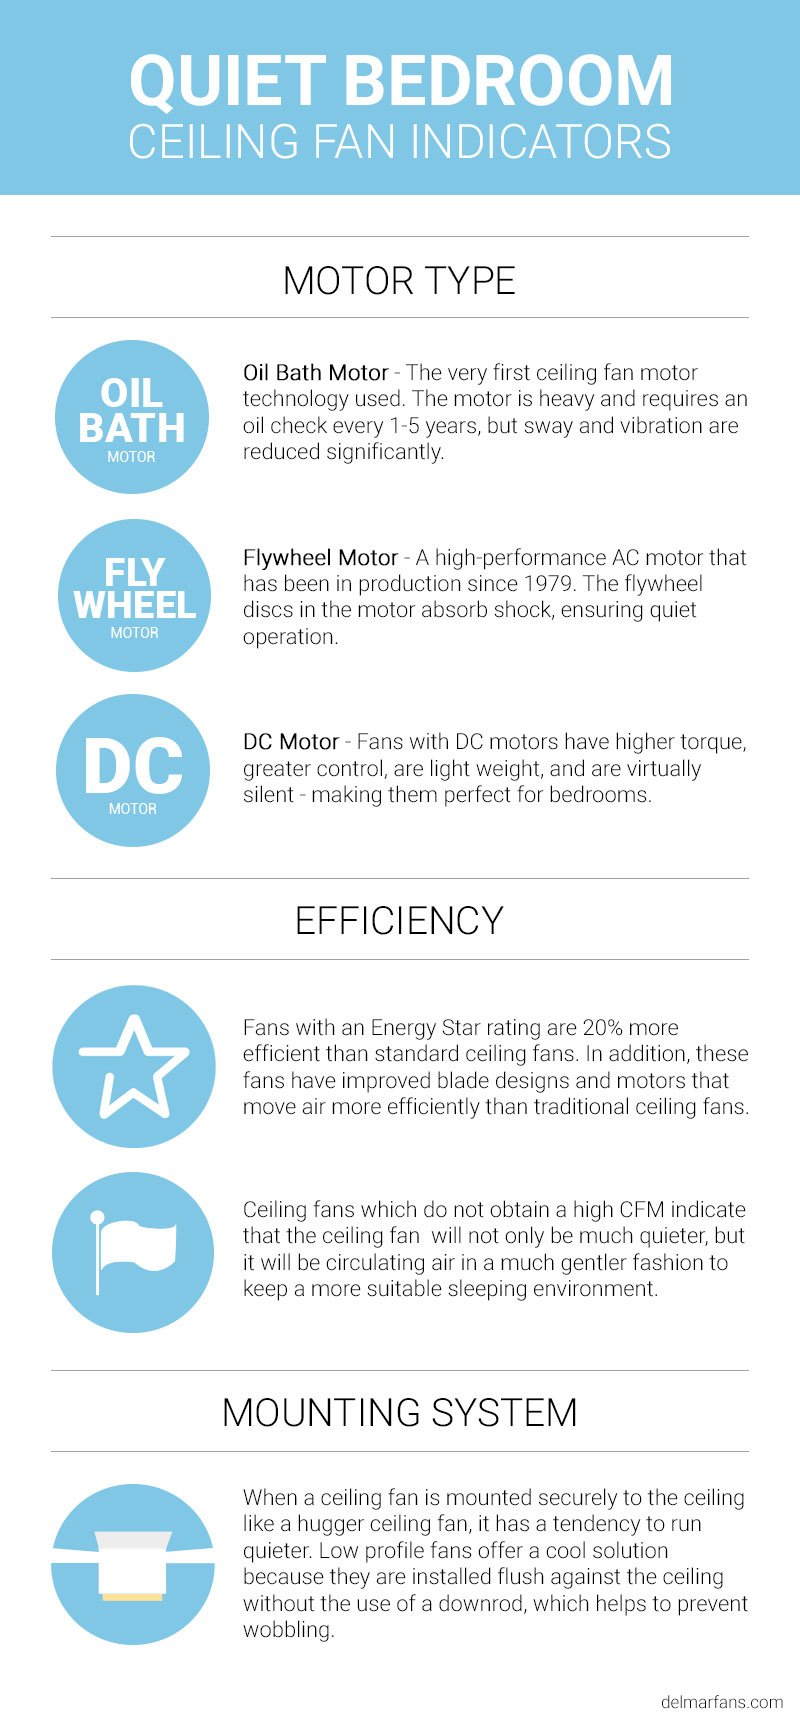 Pictured is an infographic on the top characteristics of ceiling fans to consider when purchasing a fan for your bedroom.